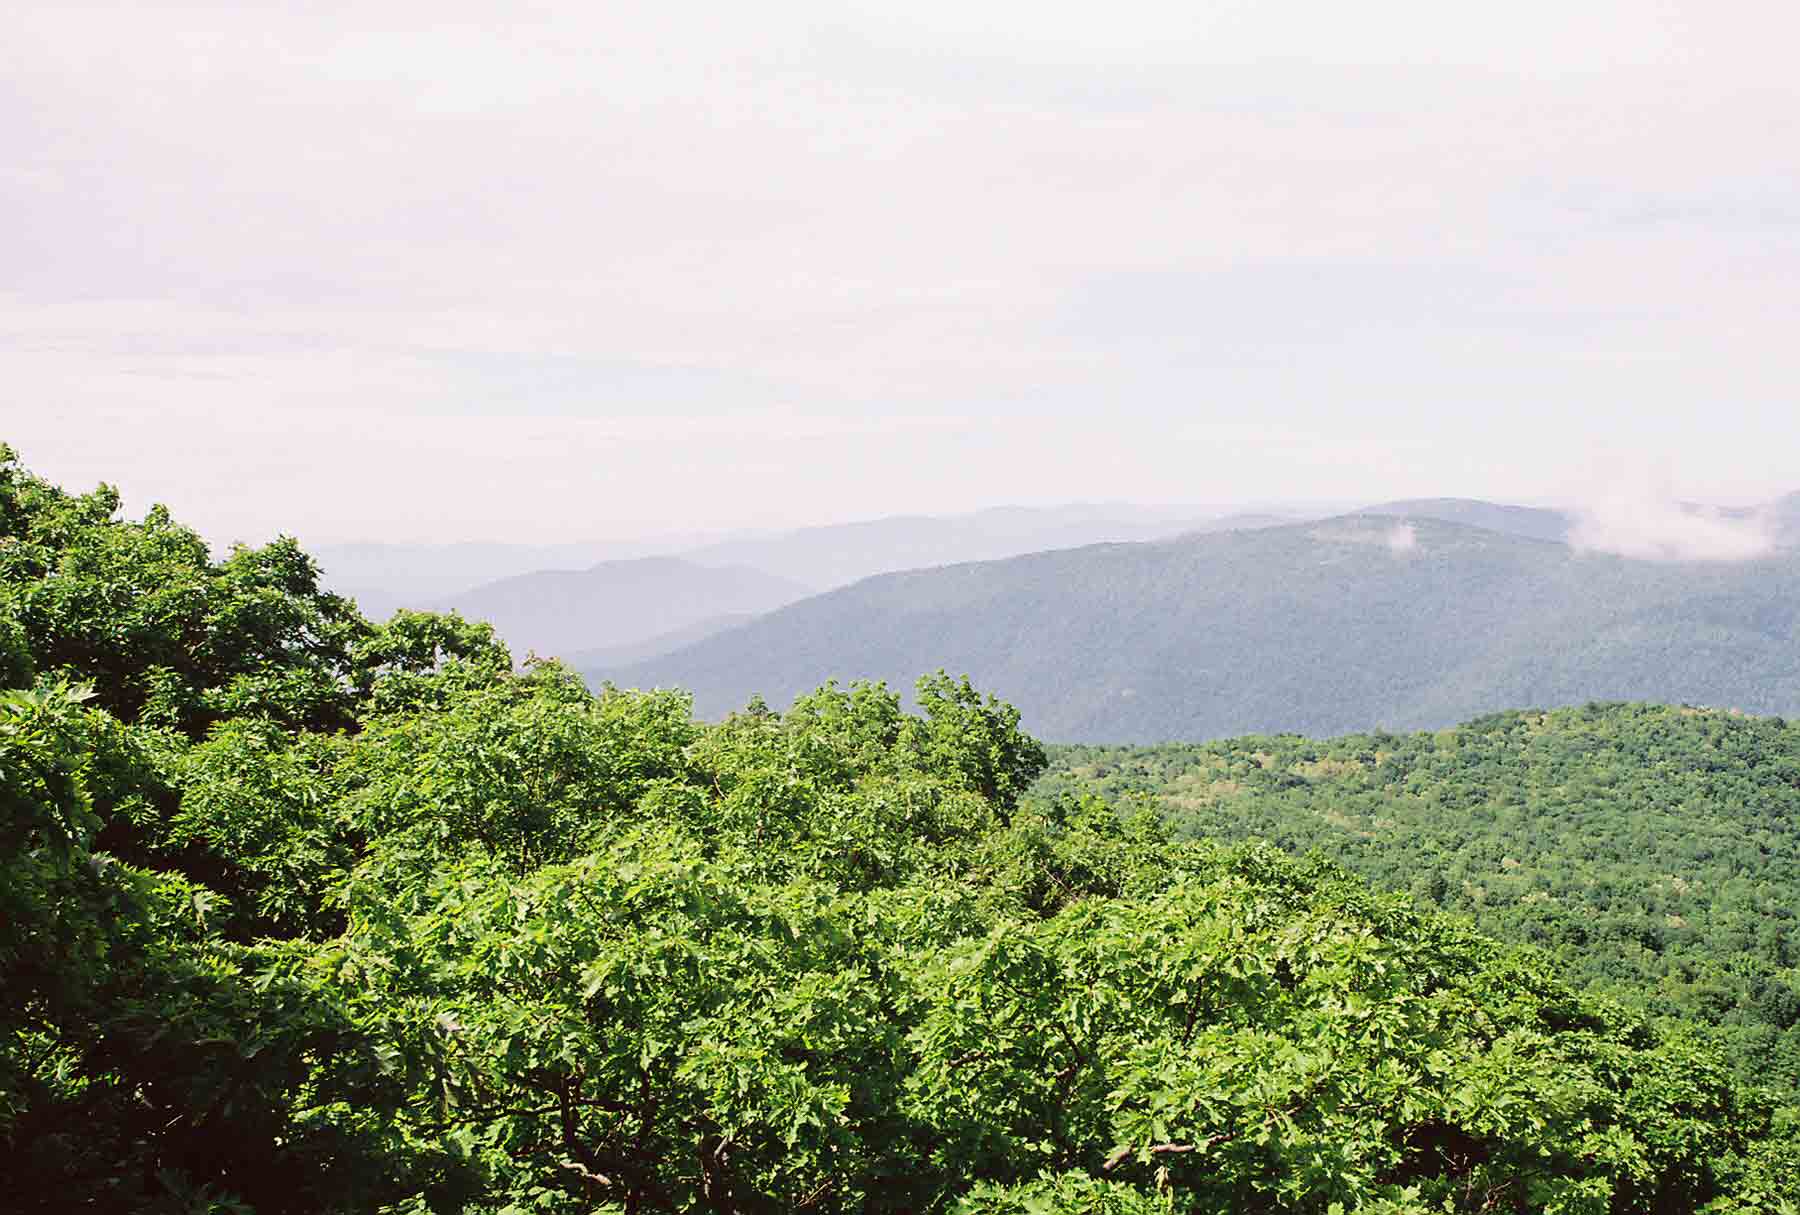 mm 2.8 - View from ledge near summit of Hightop (May 2004).  Courtesy dlcul@conncoll.edu